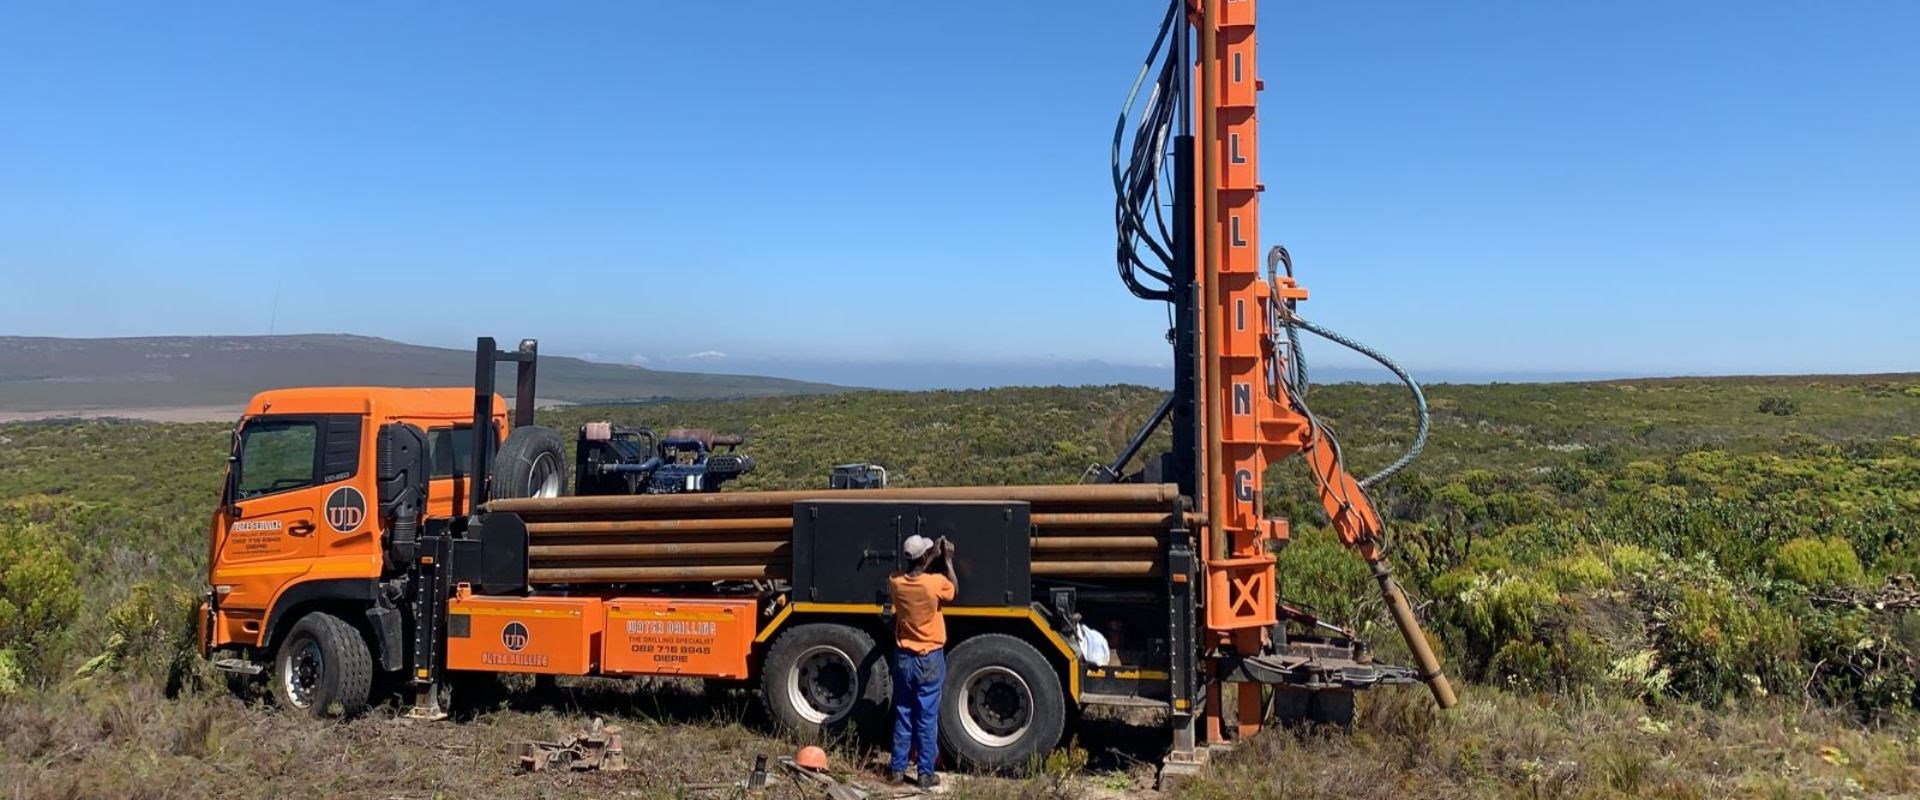 Borehole drilling for farming, industrial and residential water supply